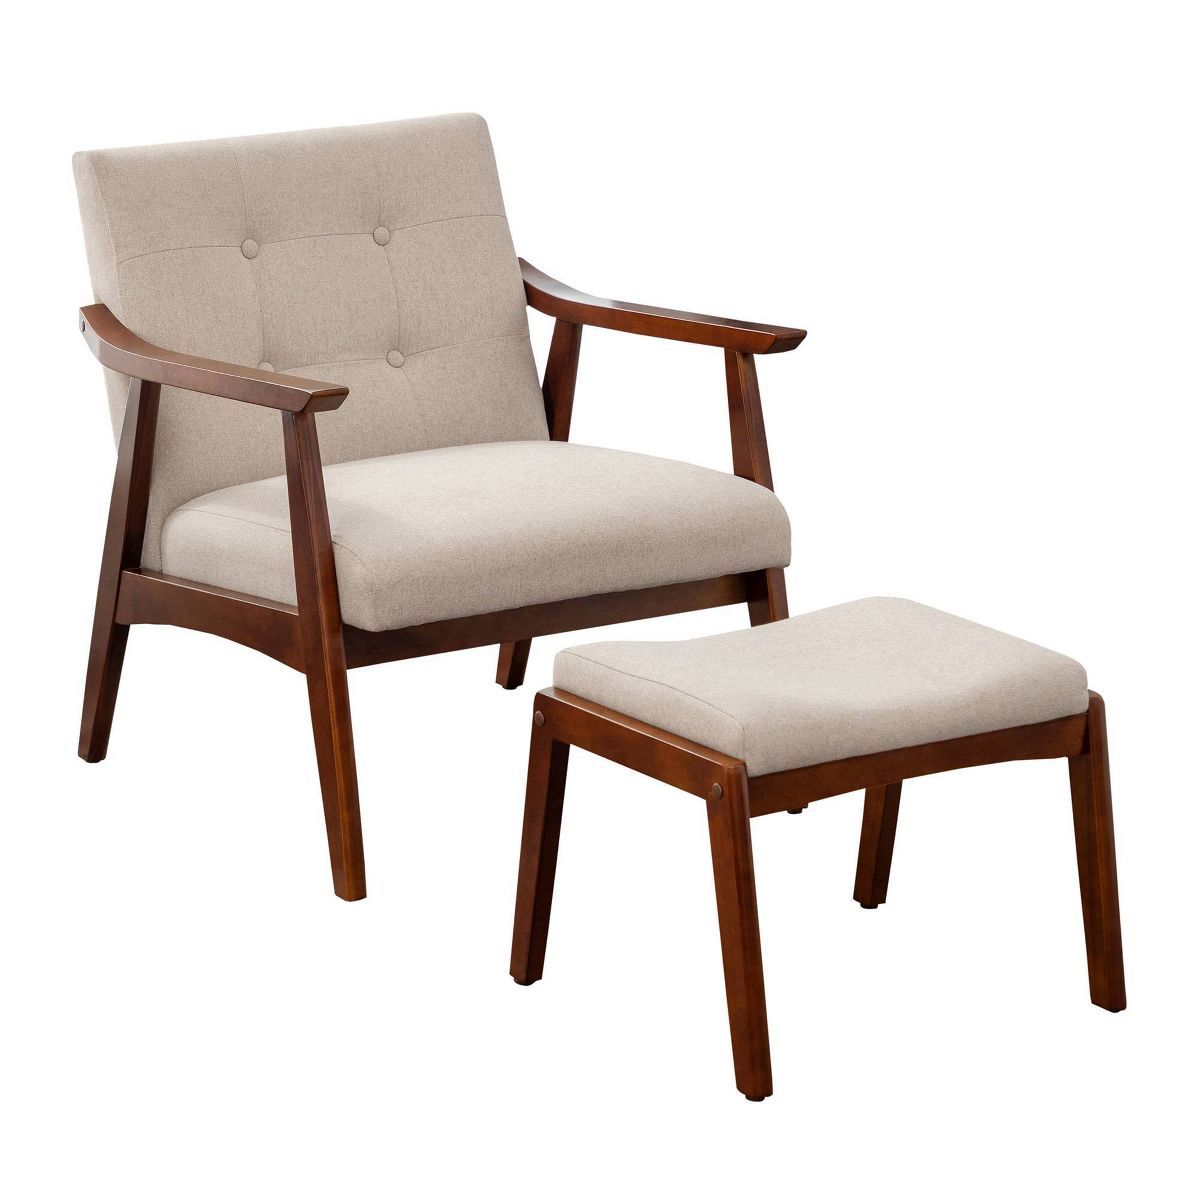 Breighton Home Take a Seat Natalie Accent Chair and Ottoman Set Sandy Beige Fabric/Espresso | Target